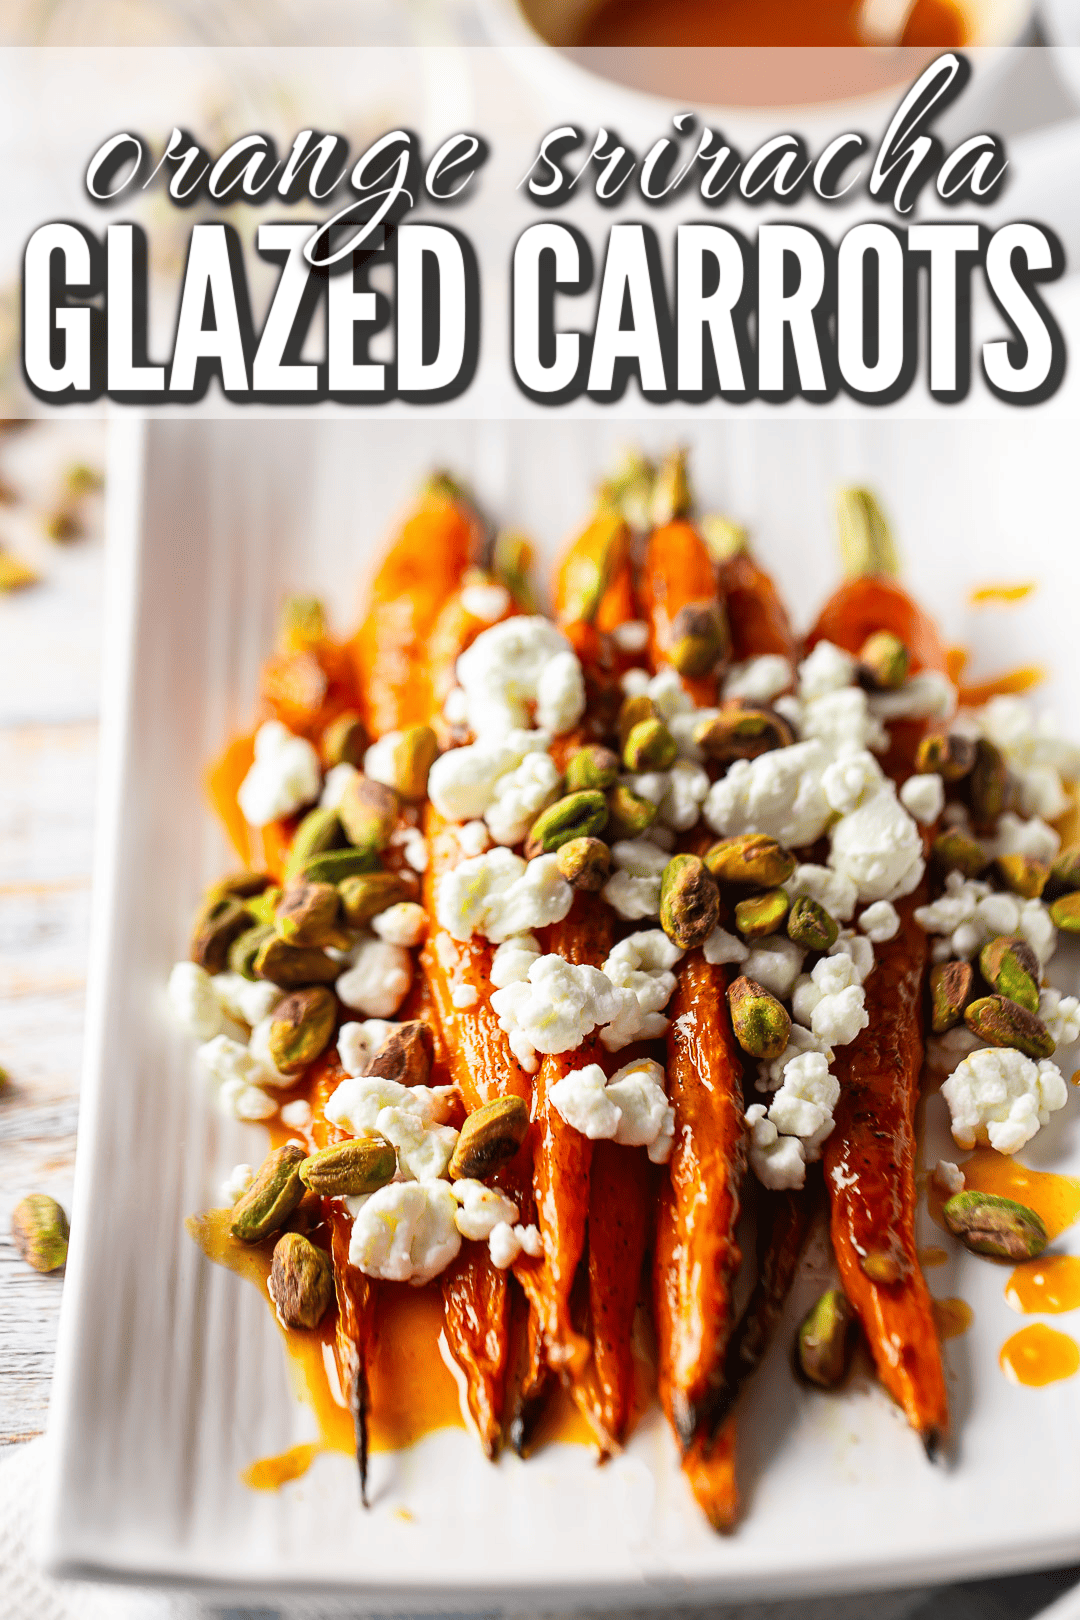 Glazed carrots recipe prepared and garnished with goat cheese and toasted pistachios.